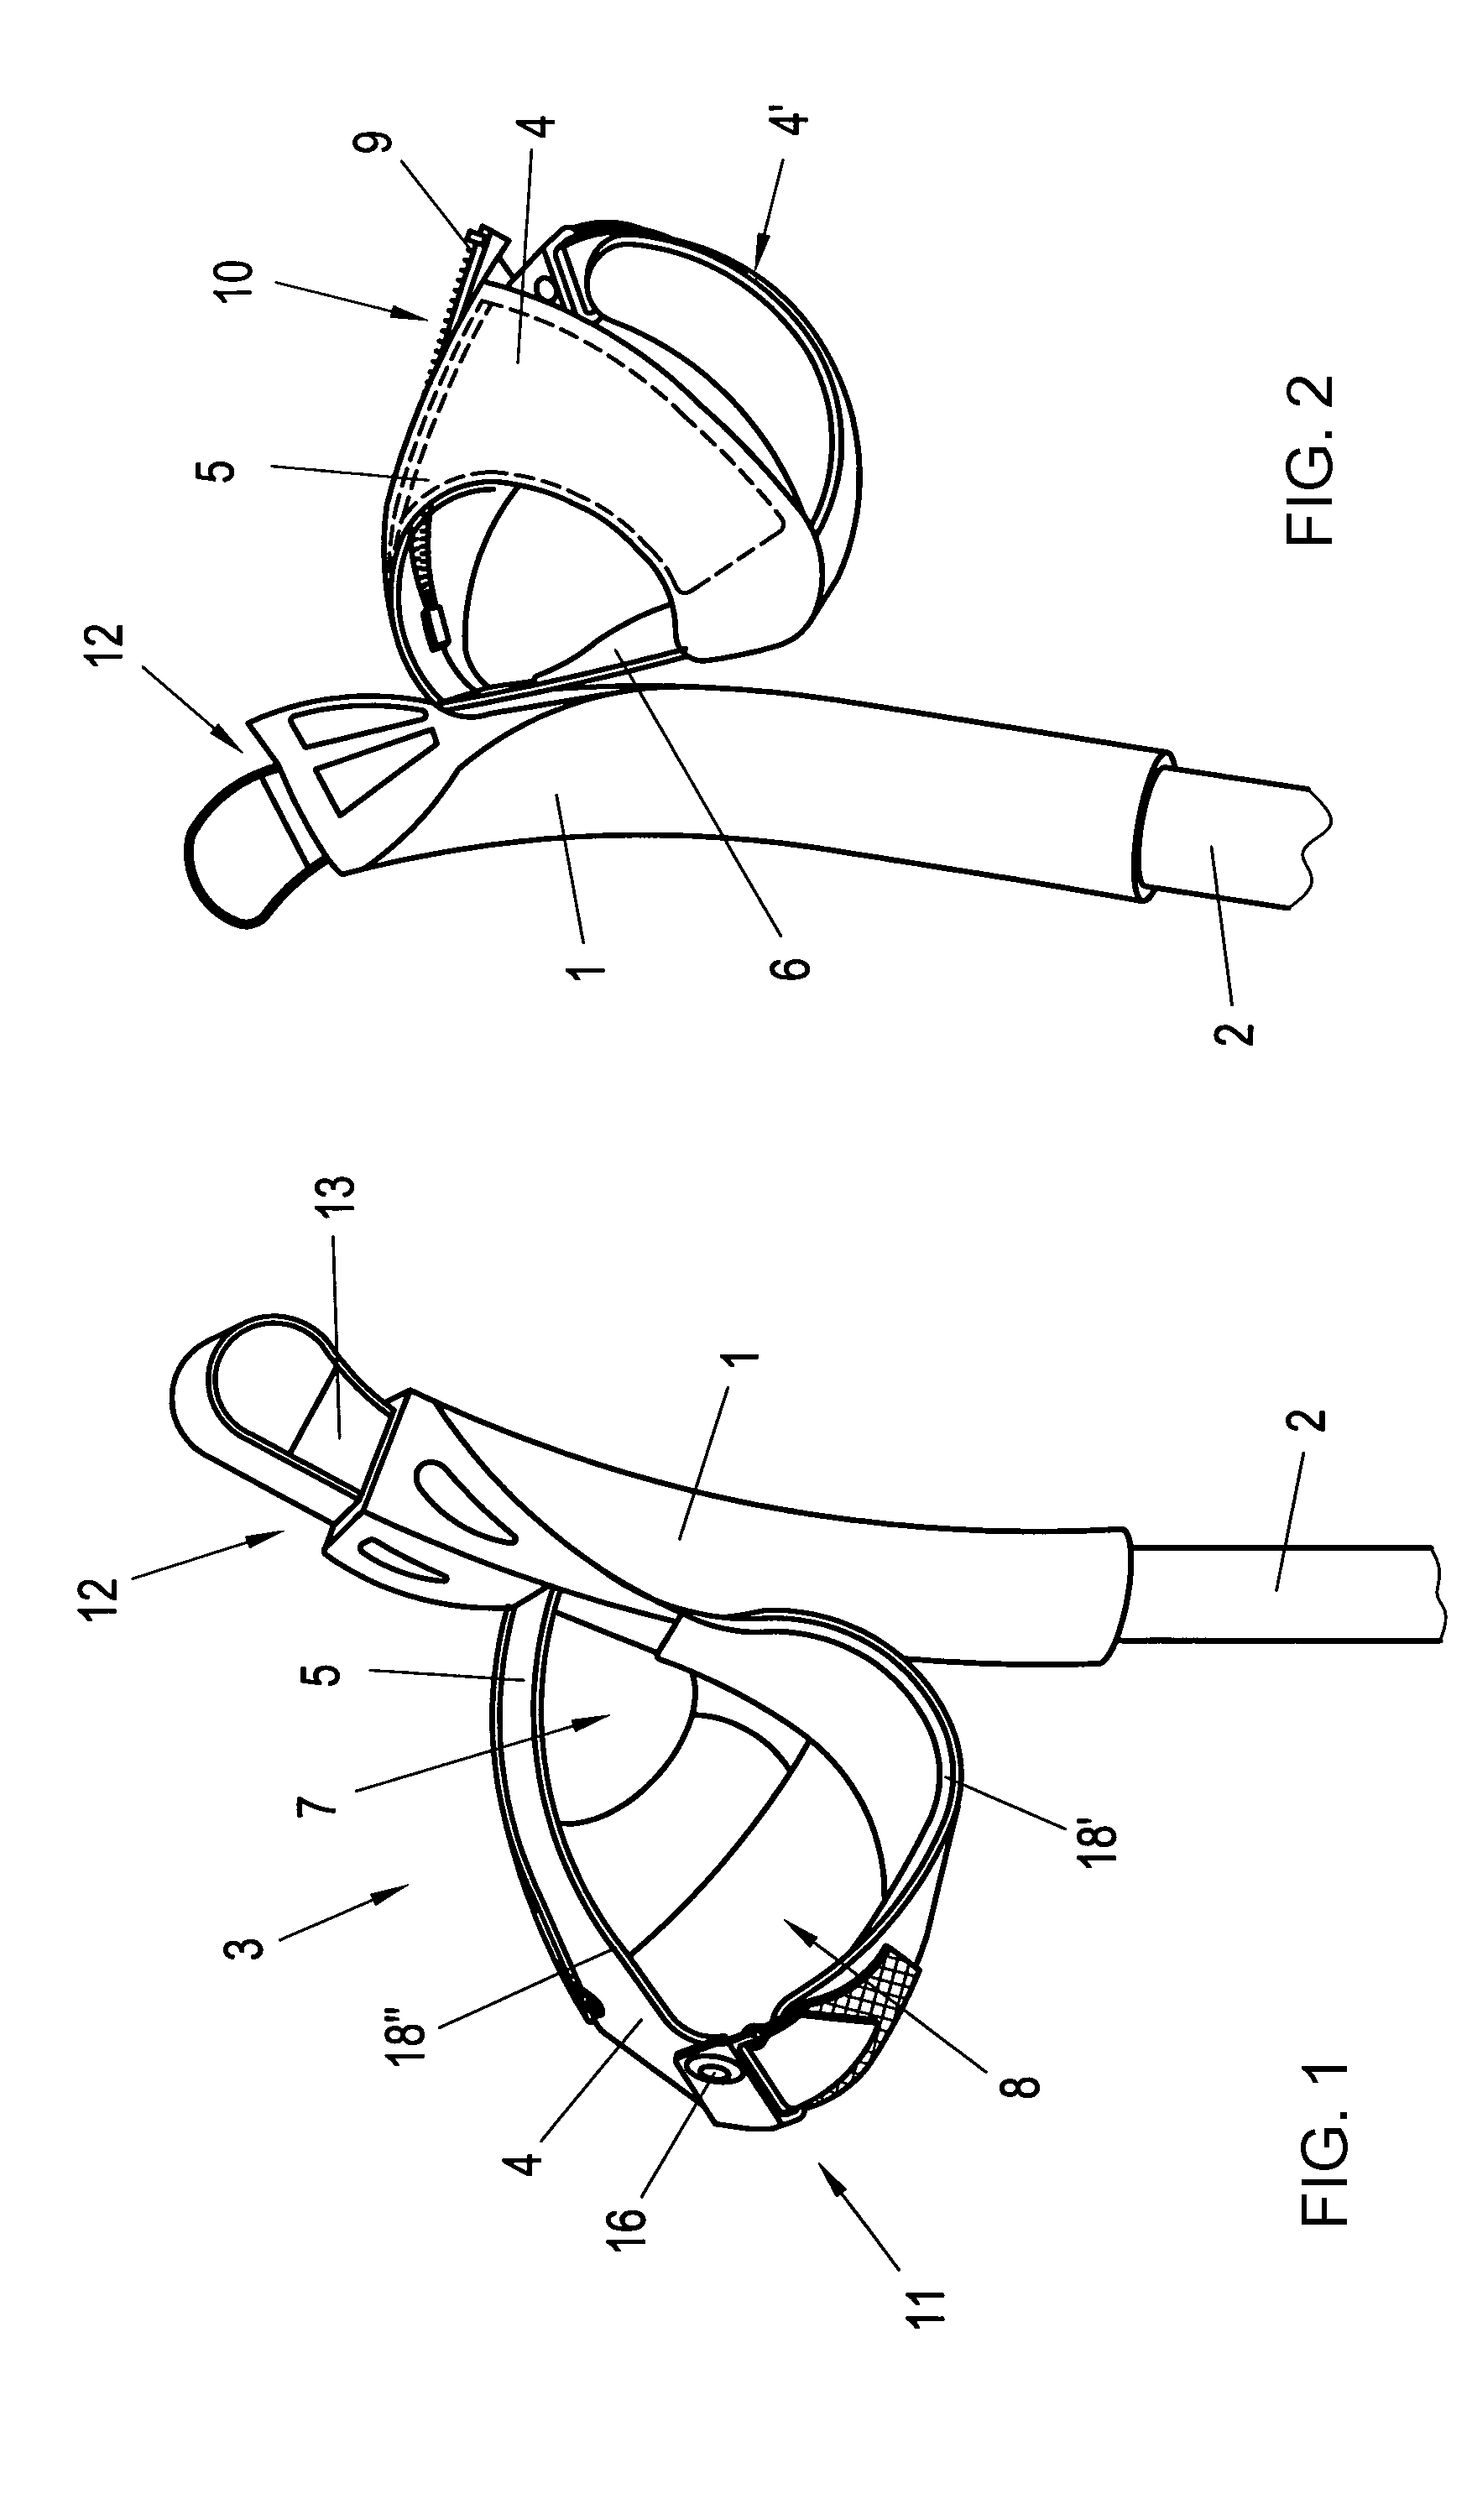 Holding apparatus having adjustment apparatus and separate closing apparatus, attachable to a handle